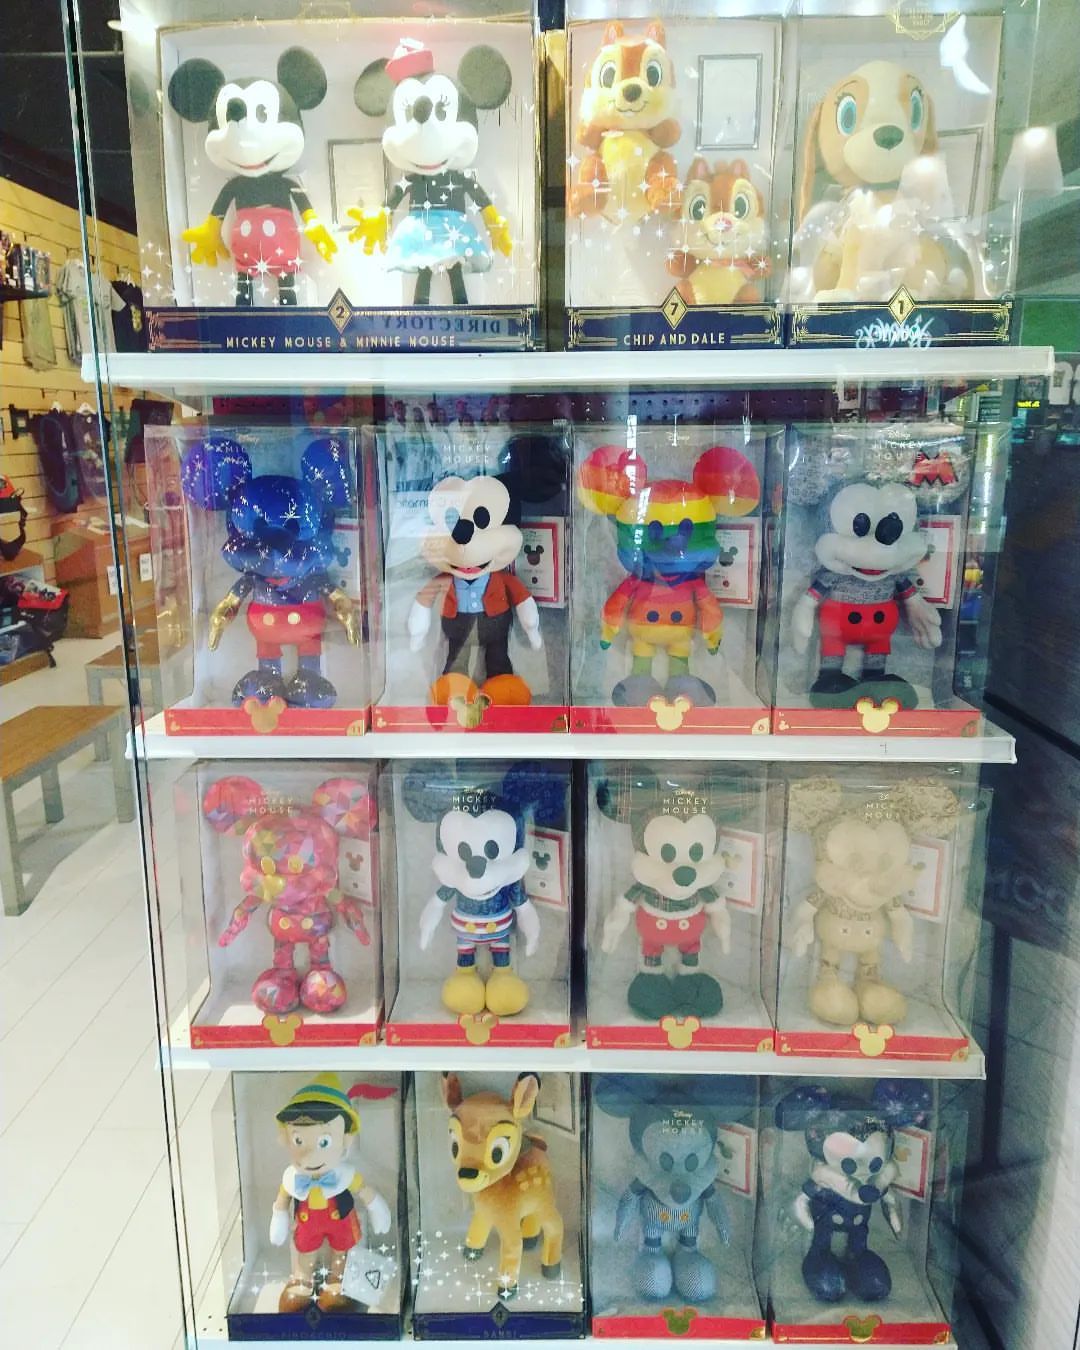 Disney collectors rejoice! These limited edition collectible Disney plush figures, with their original shipping boxes, are available today!

#hudsonsvideogames #hudsonsvideogamesaltamonte #disney #plush #collectibles #waltdisneyworld #mickeymouse #bambi #ladyandthetramp #chipanddale #videogames #retrogames #houseofmouse  (at Altamonte Mall)
https://www.instagram.com/p/CdWOHqOLkig/?igshid=NGJjMDIxMWI=